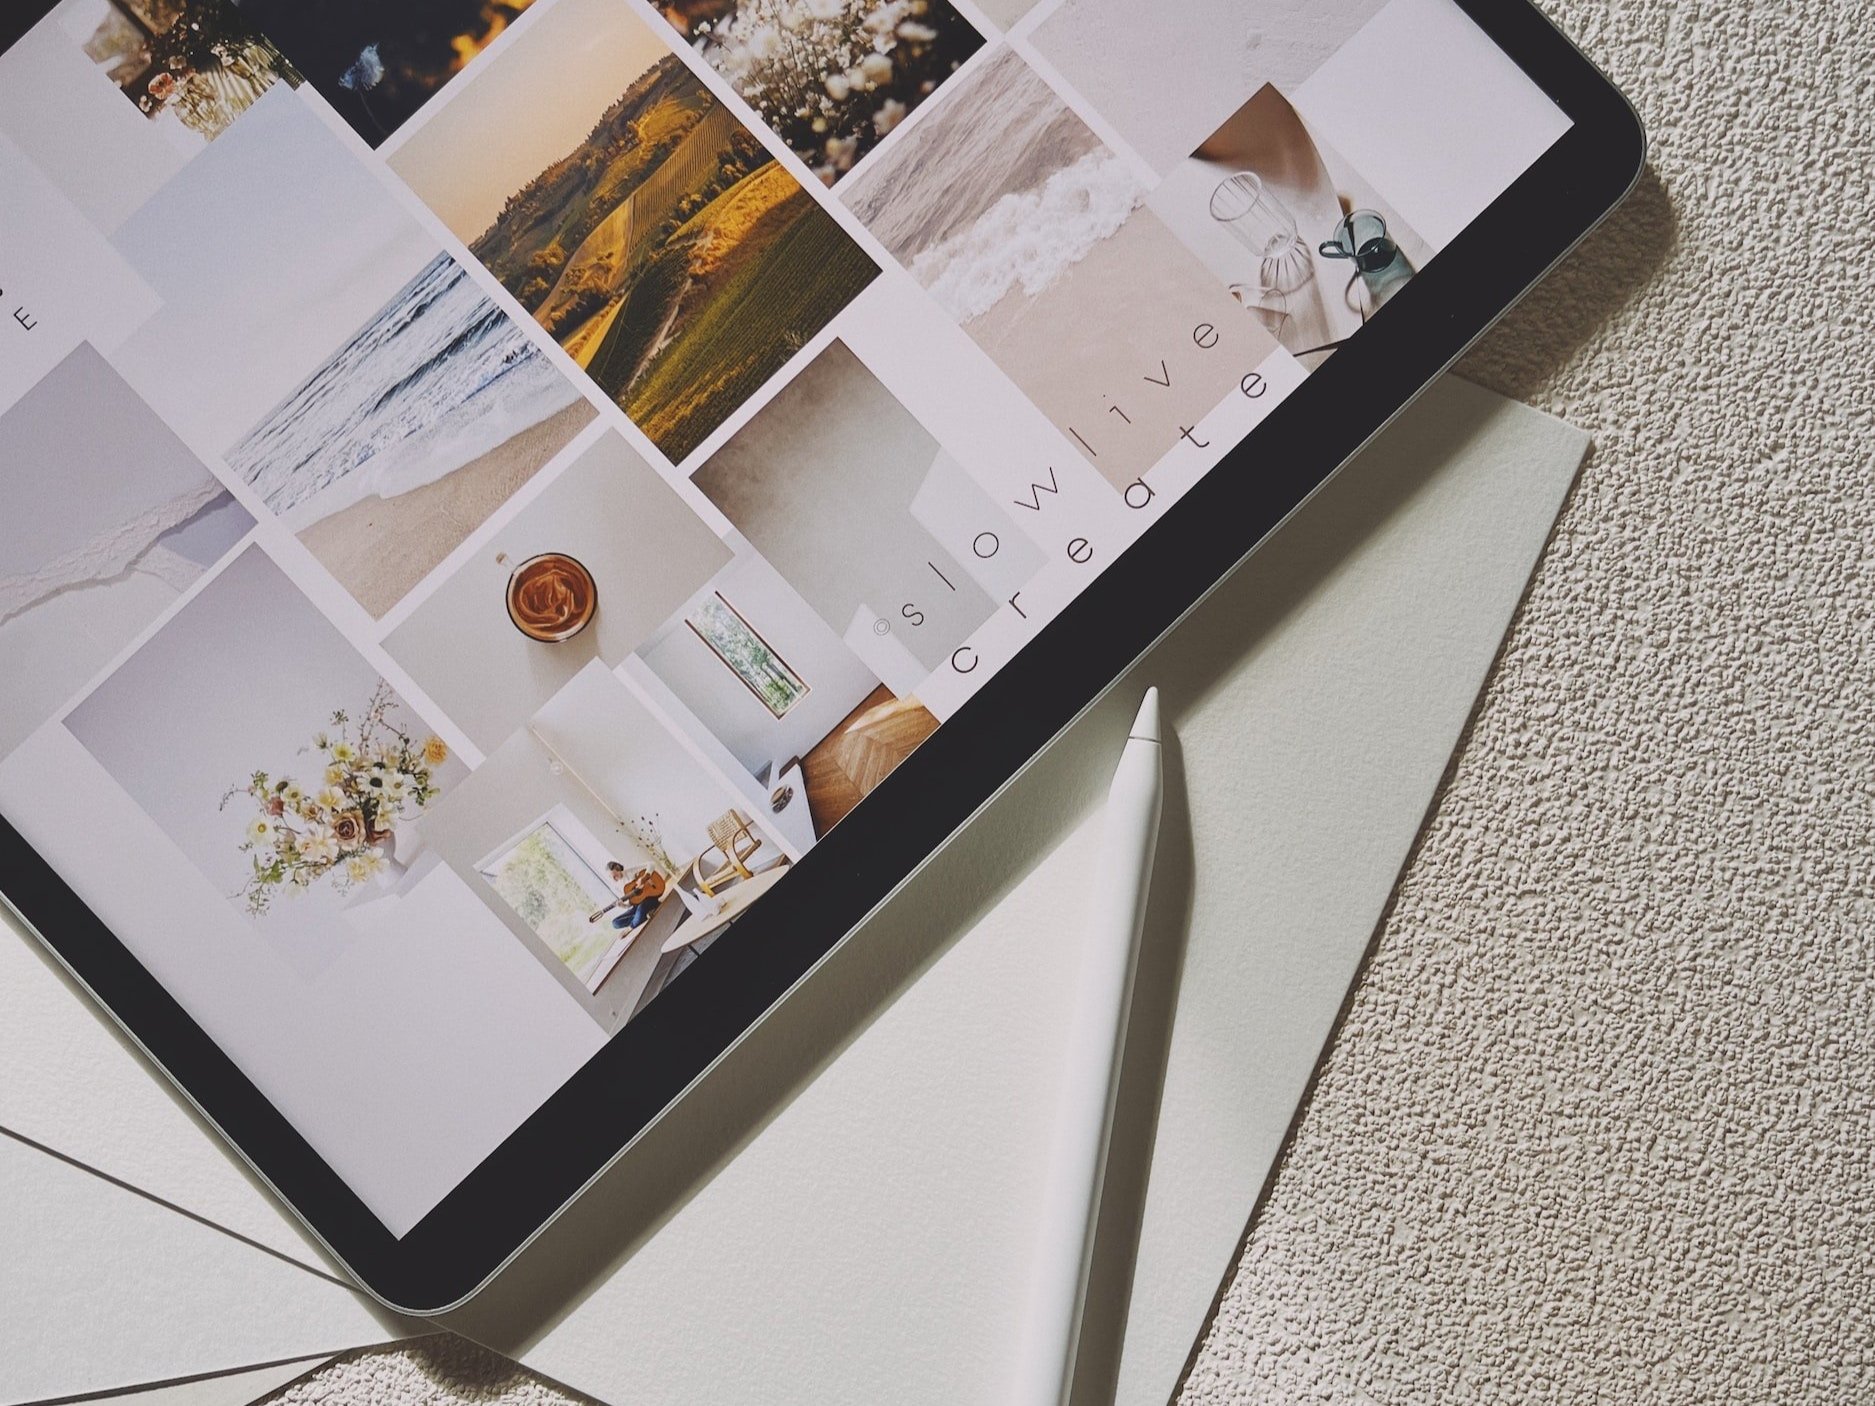 On an iPad, a mood board is displayed, with an Apple pencil to the side.